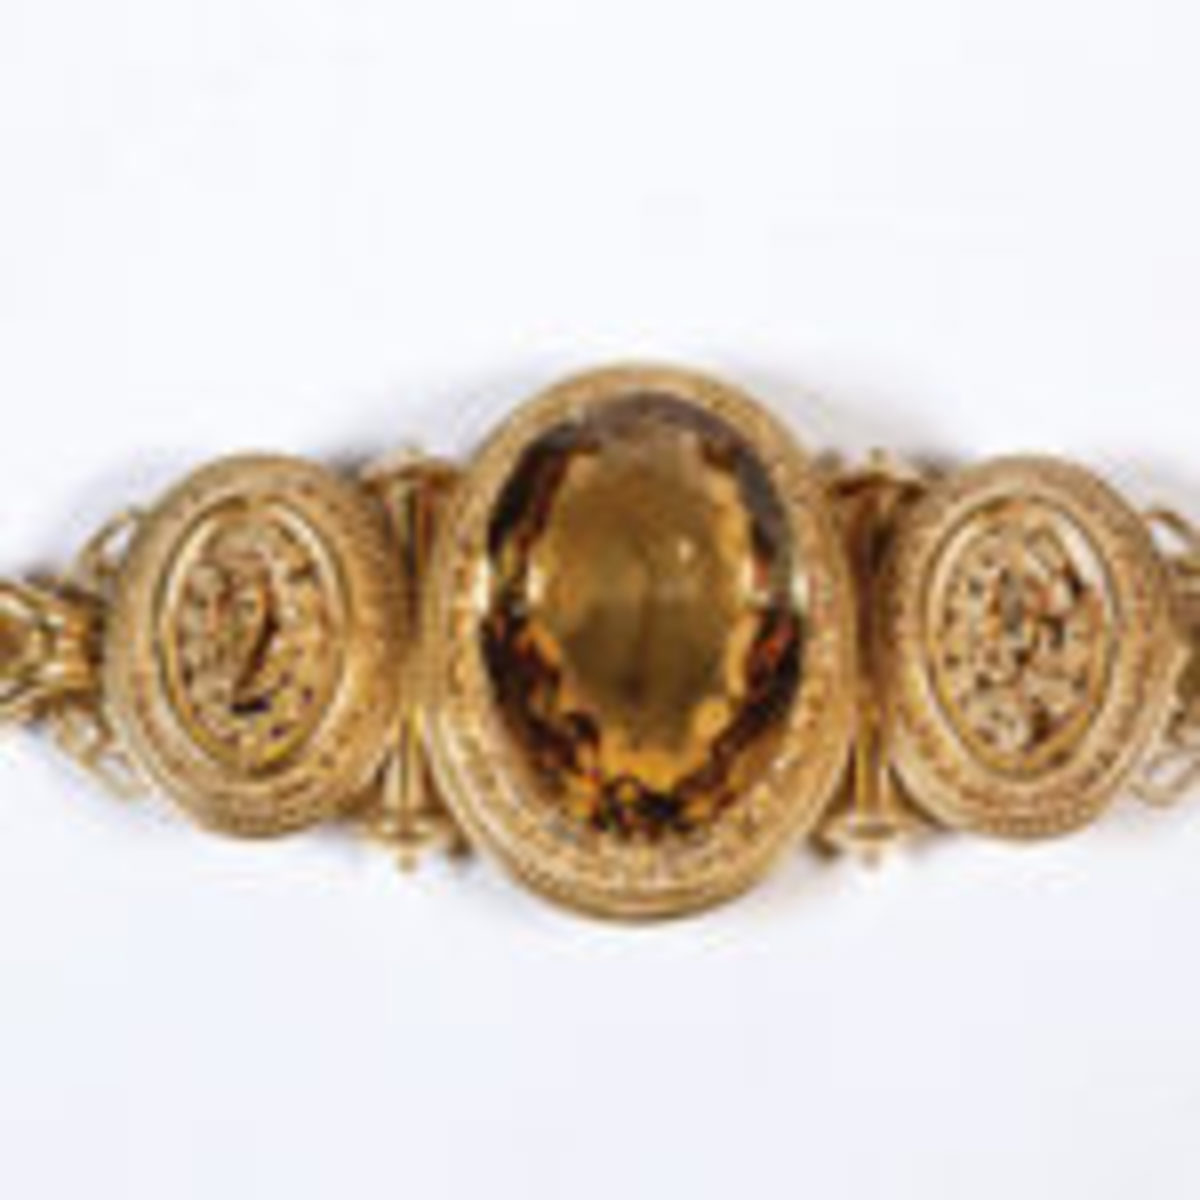 19th century Etruscan Revival gold bracelet with Papal States hallmark